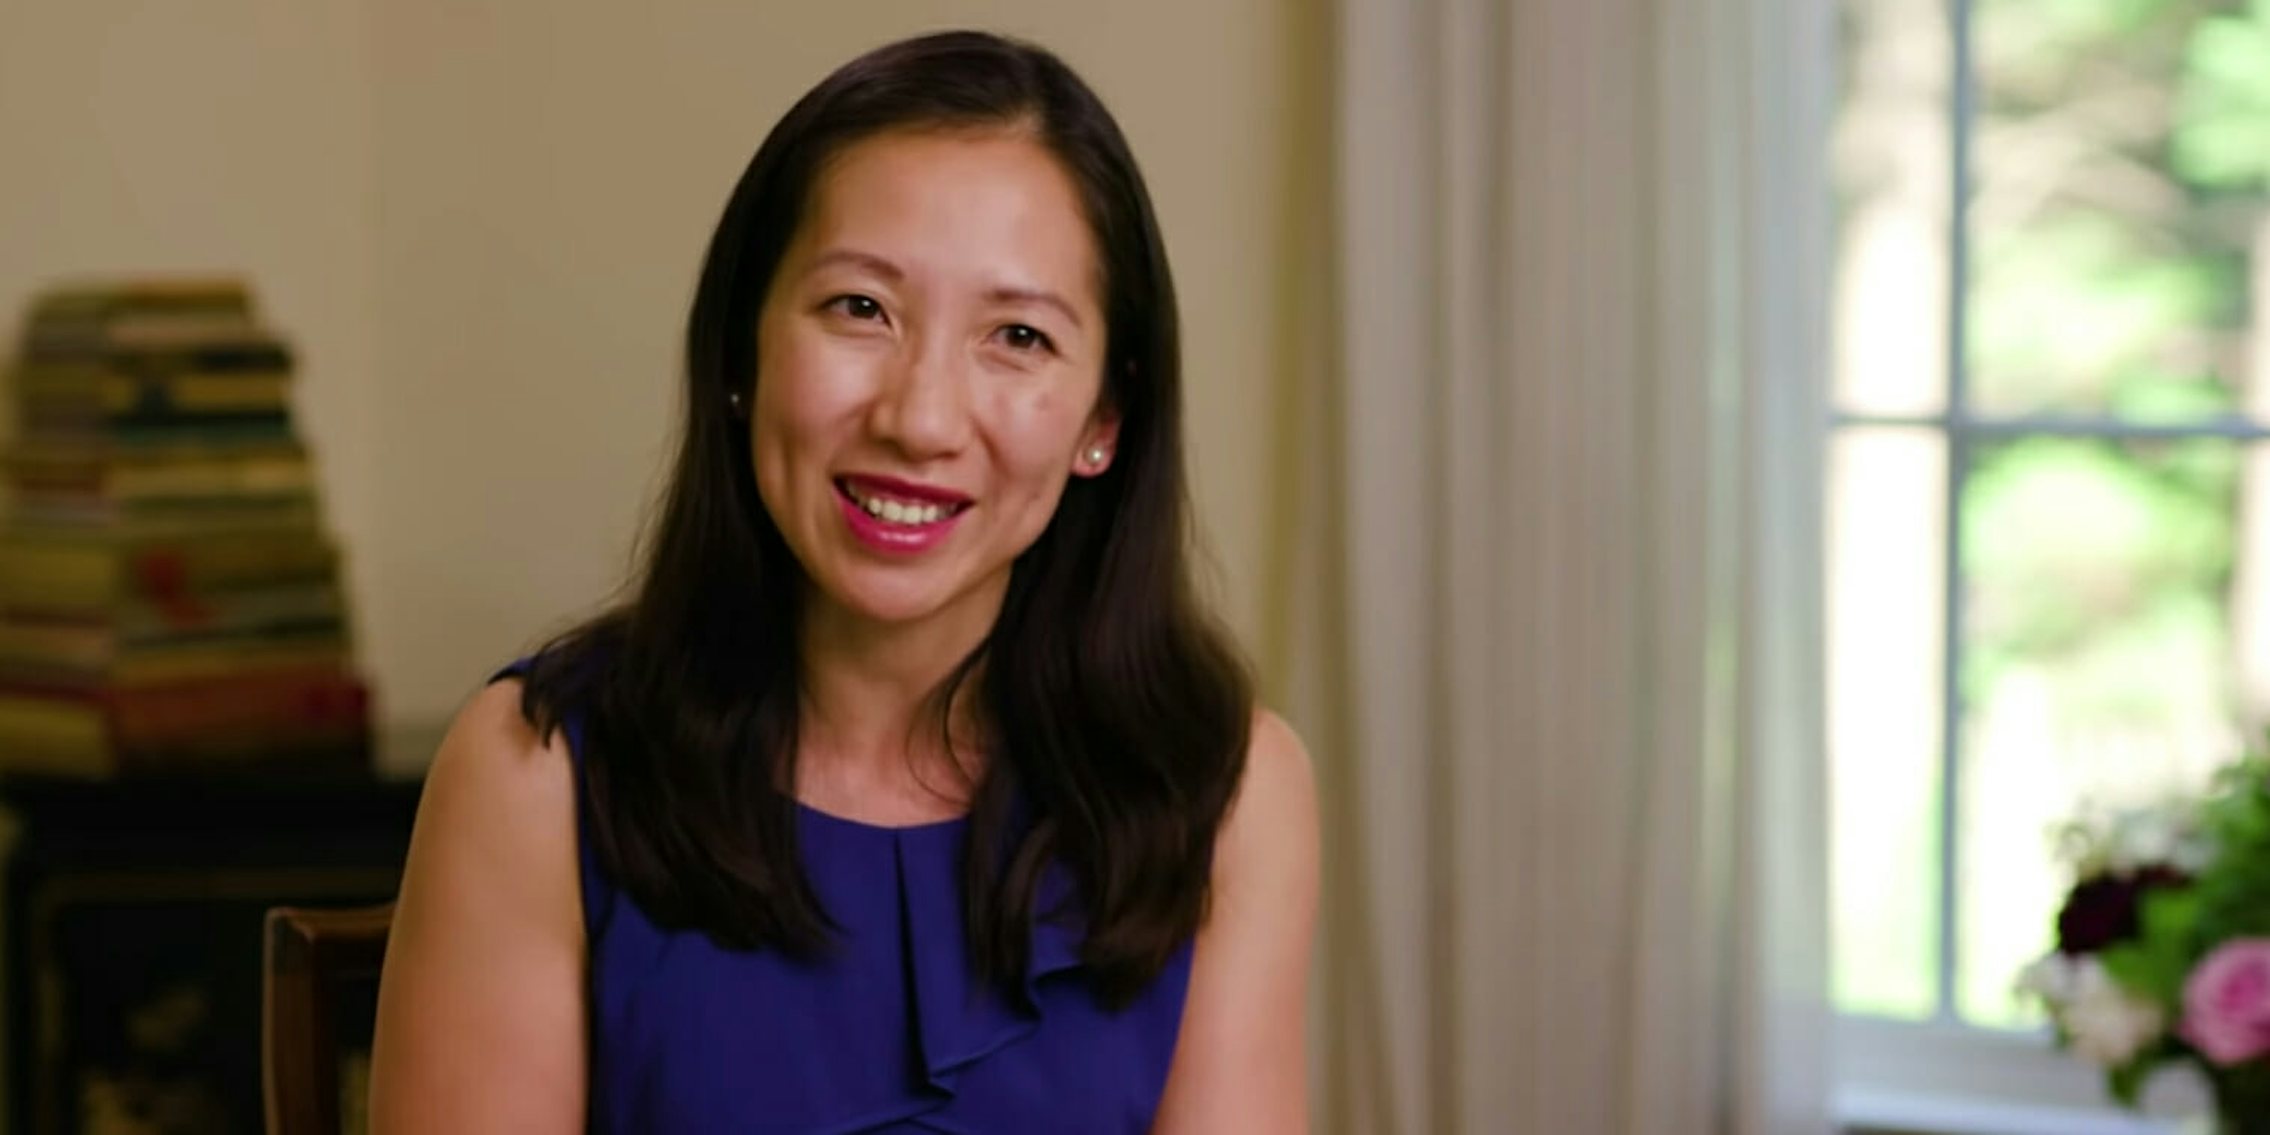 chinese immigrant doctor planned parenthood